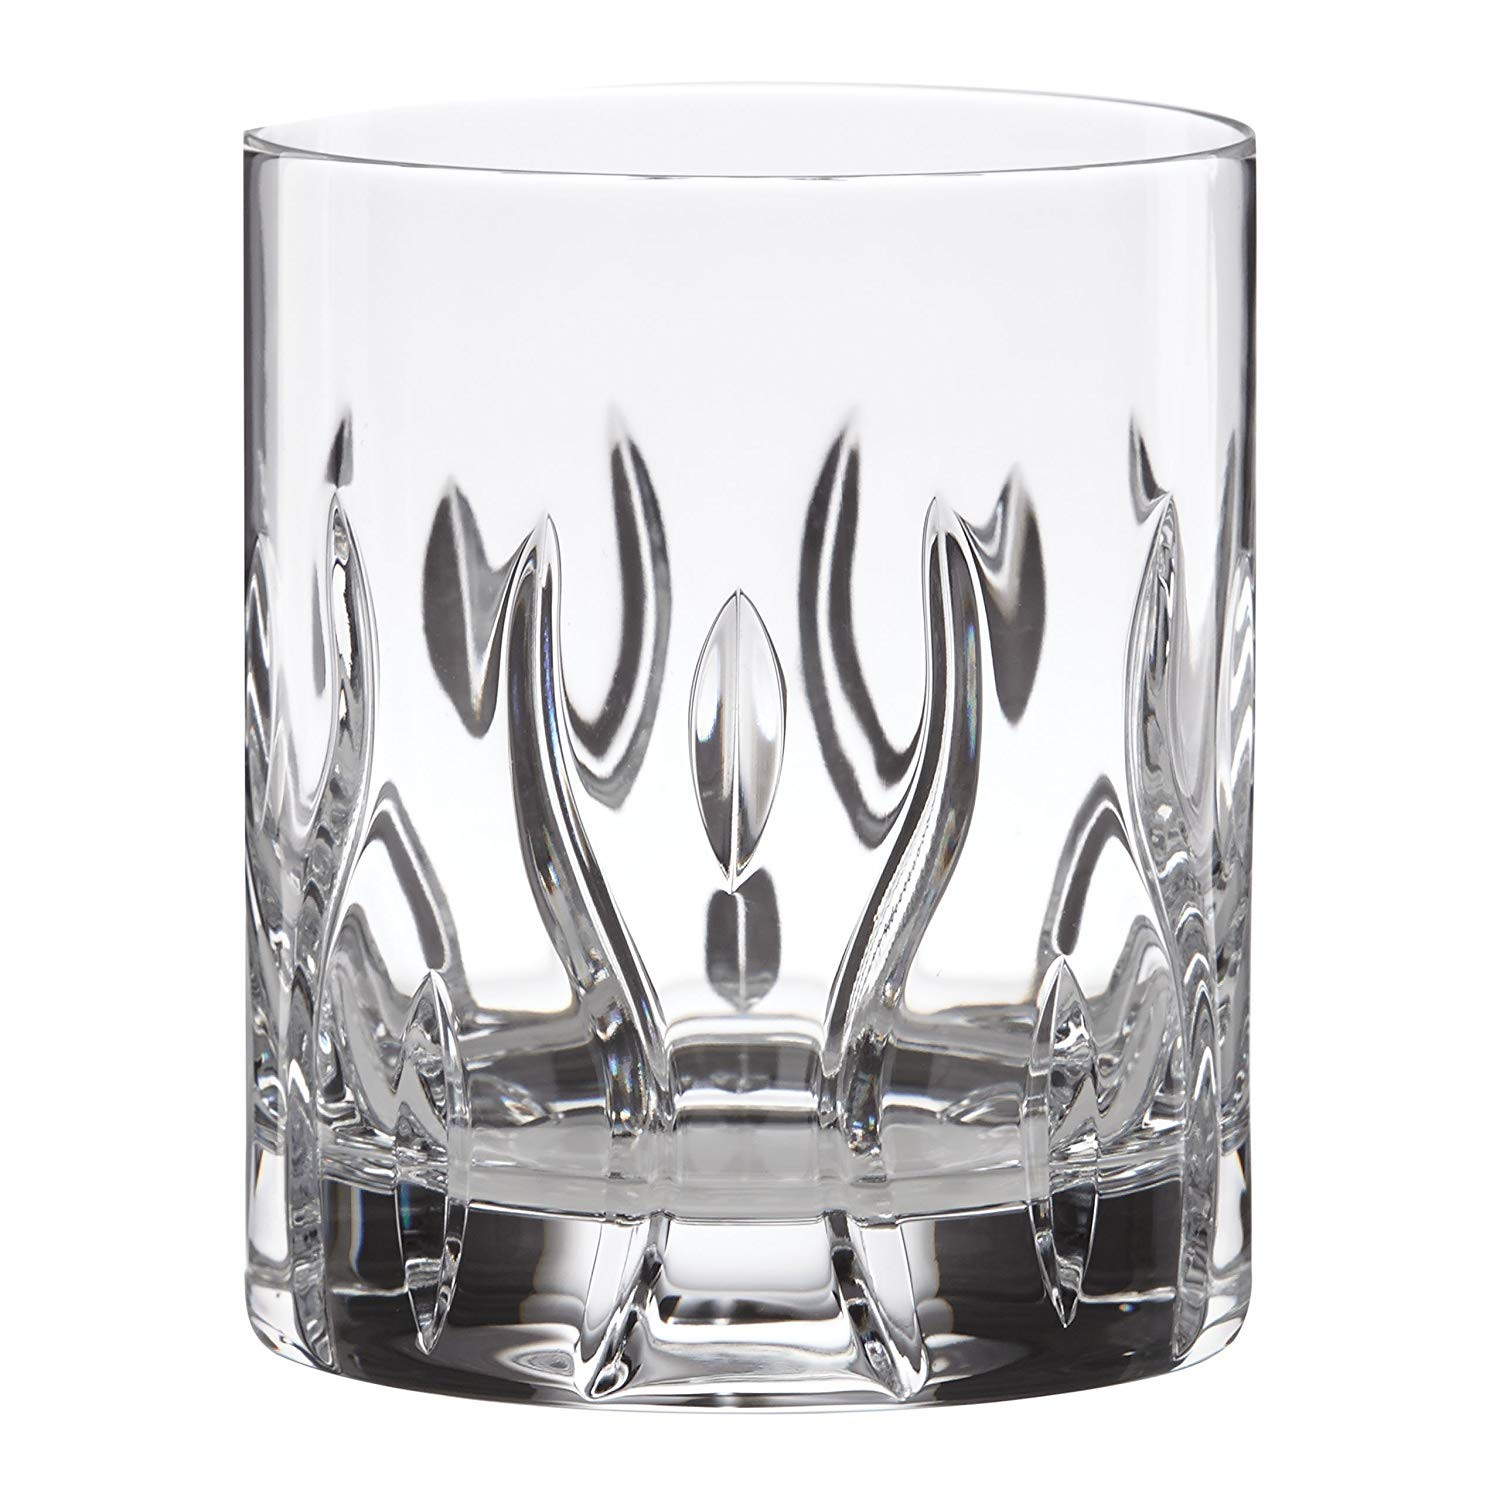 16 Unique Waterford Crystal Vase Price 2024 free download waterford crystal vase price of amazon com lenox 857141 irish spring darcy double old fashioned throughout amazon com lenox 857141 irish spring darcy double old fashioned glasses set of 2 cl